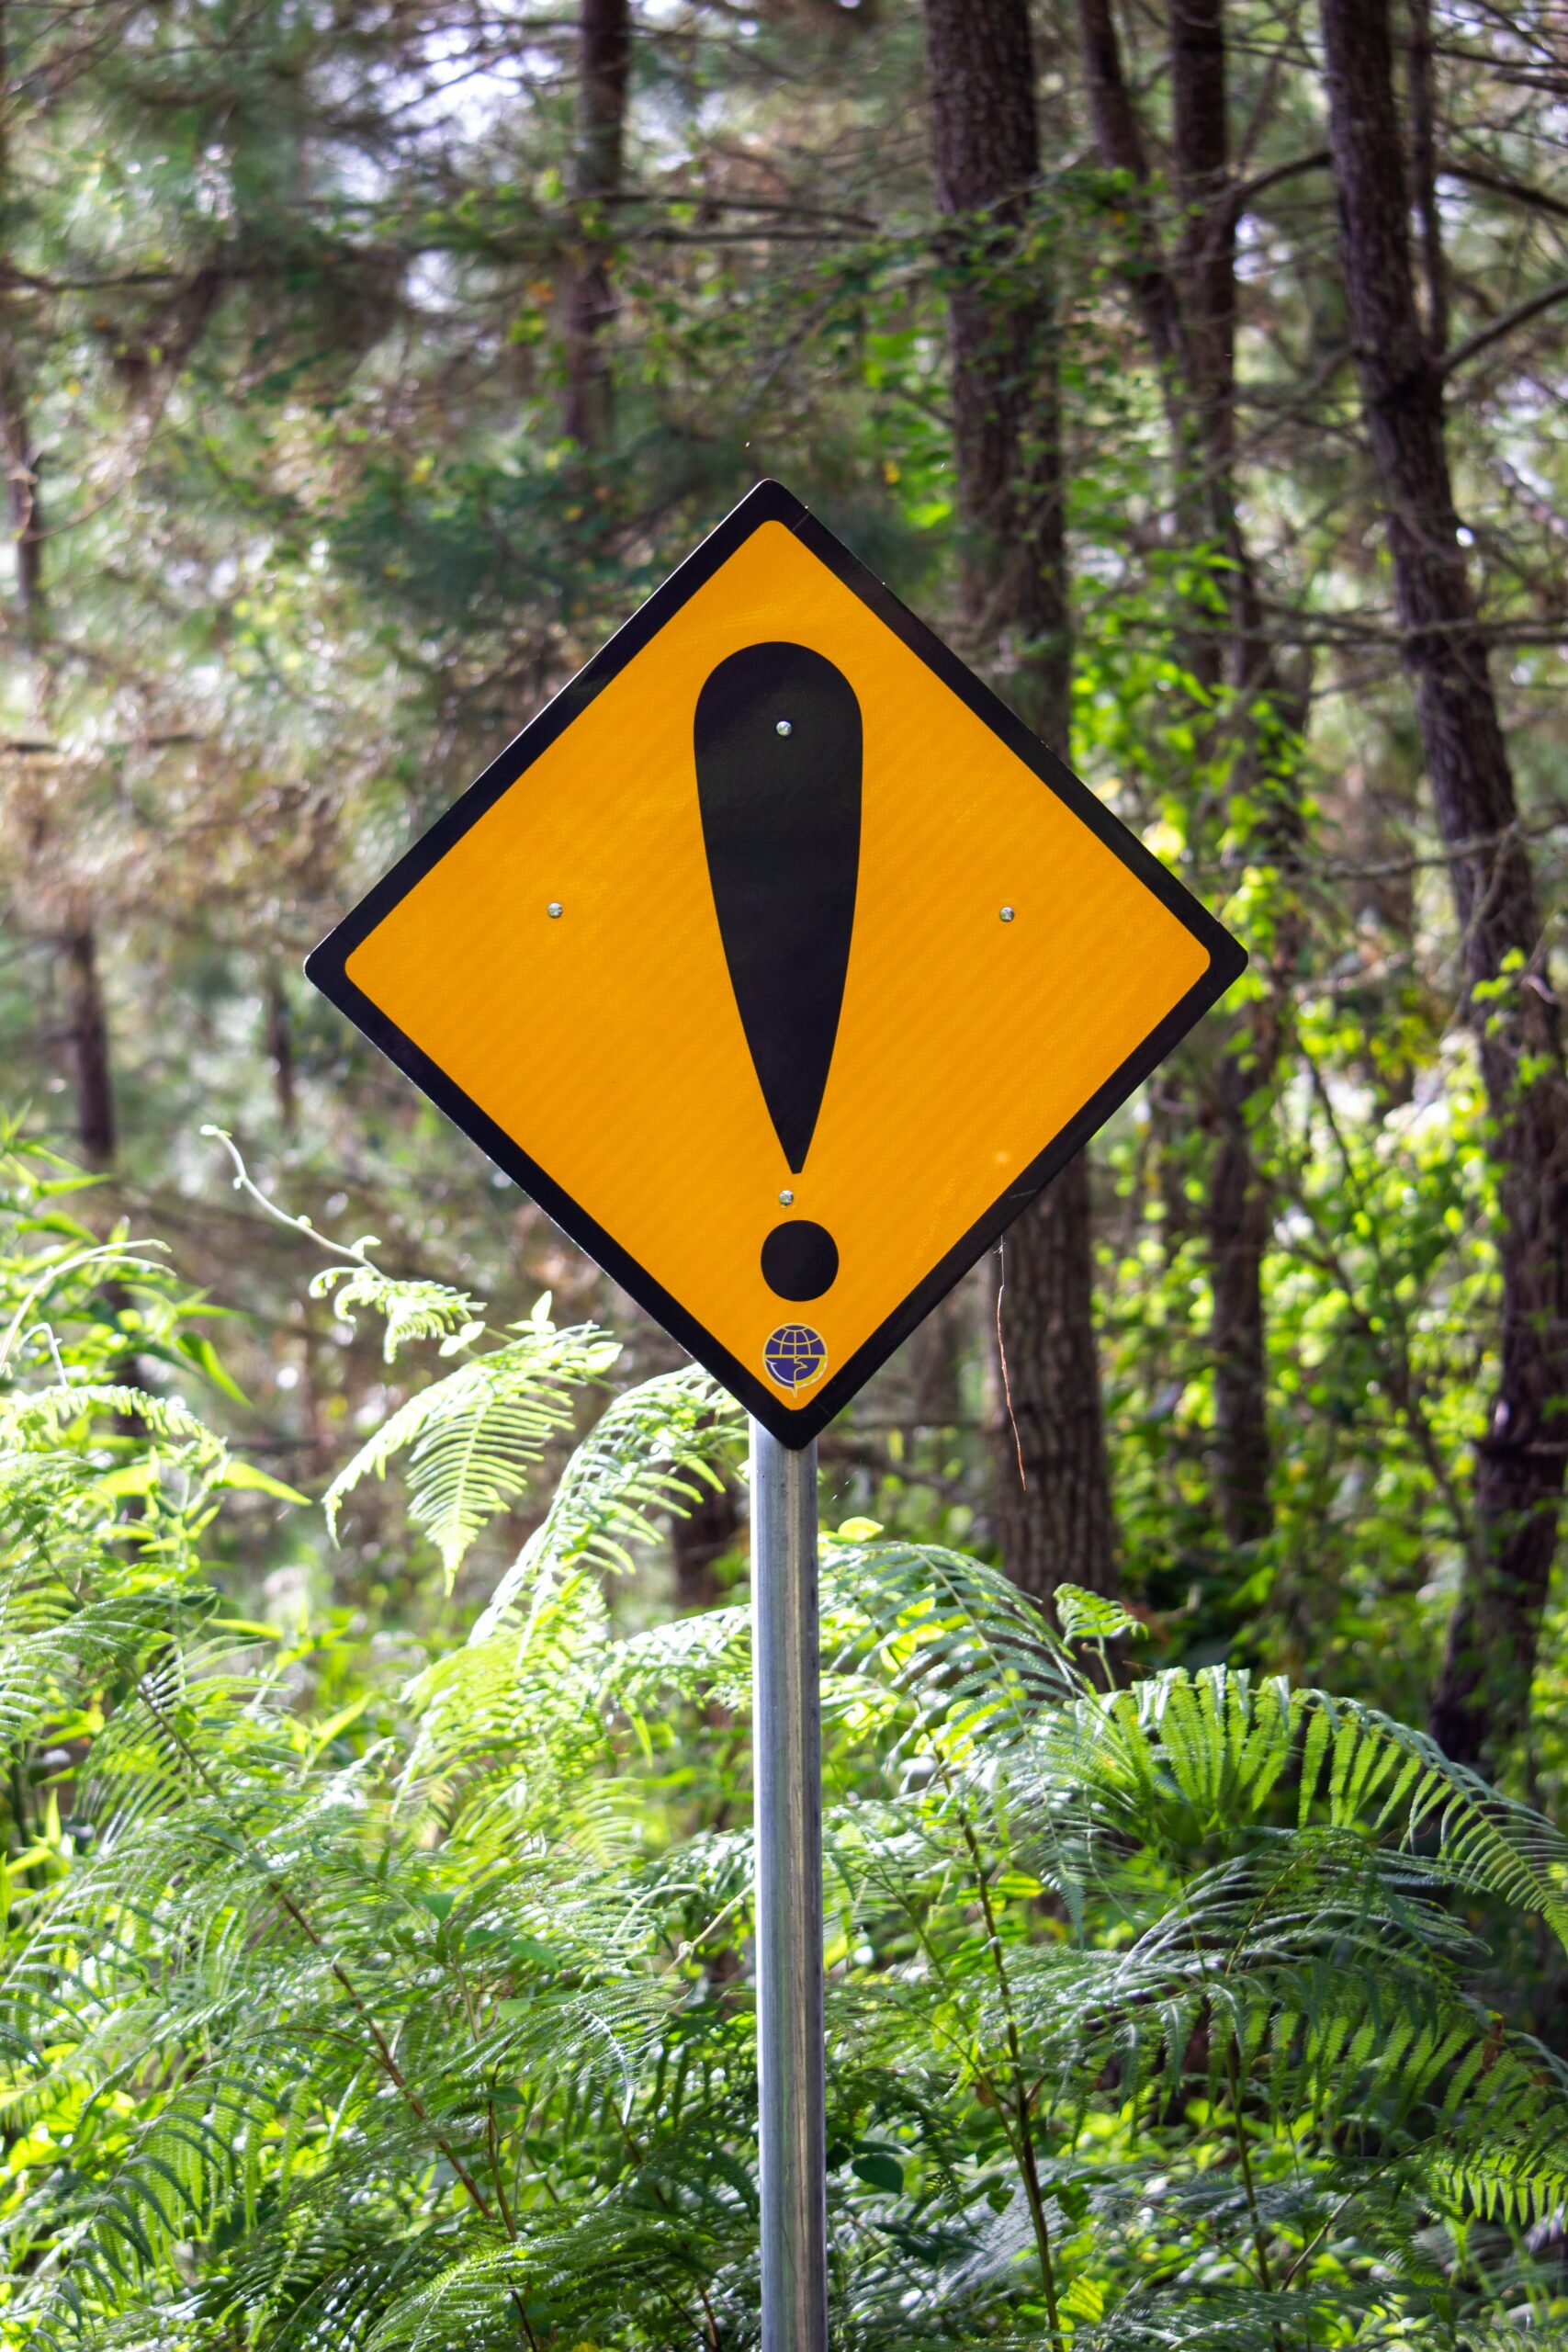 Yellow road sign in diamond shape with large exclamation point graphic